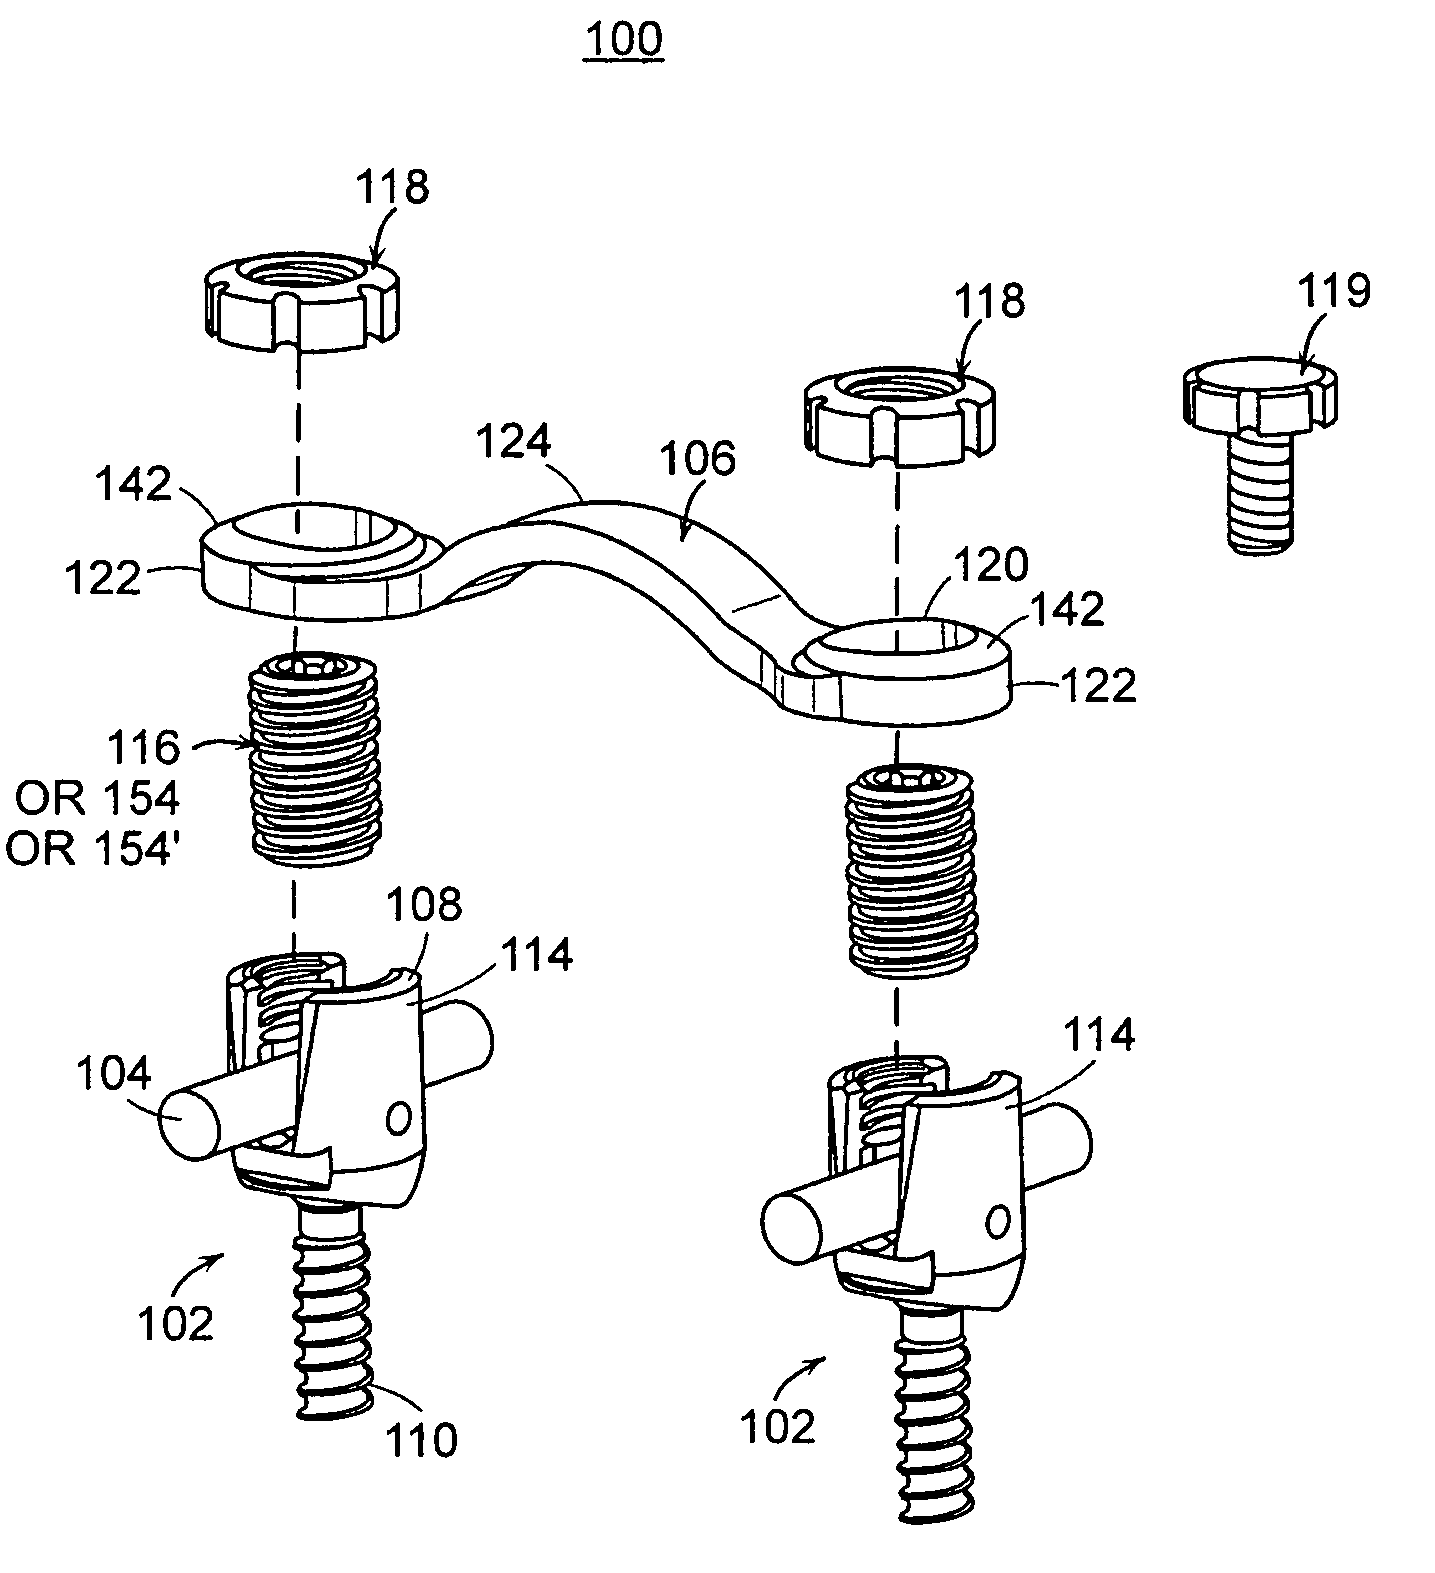 Head-to-head connector spinal fixation system